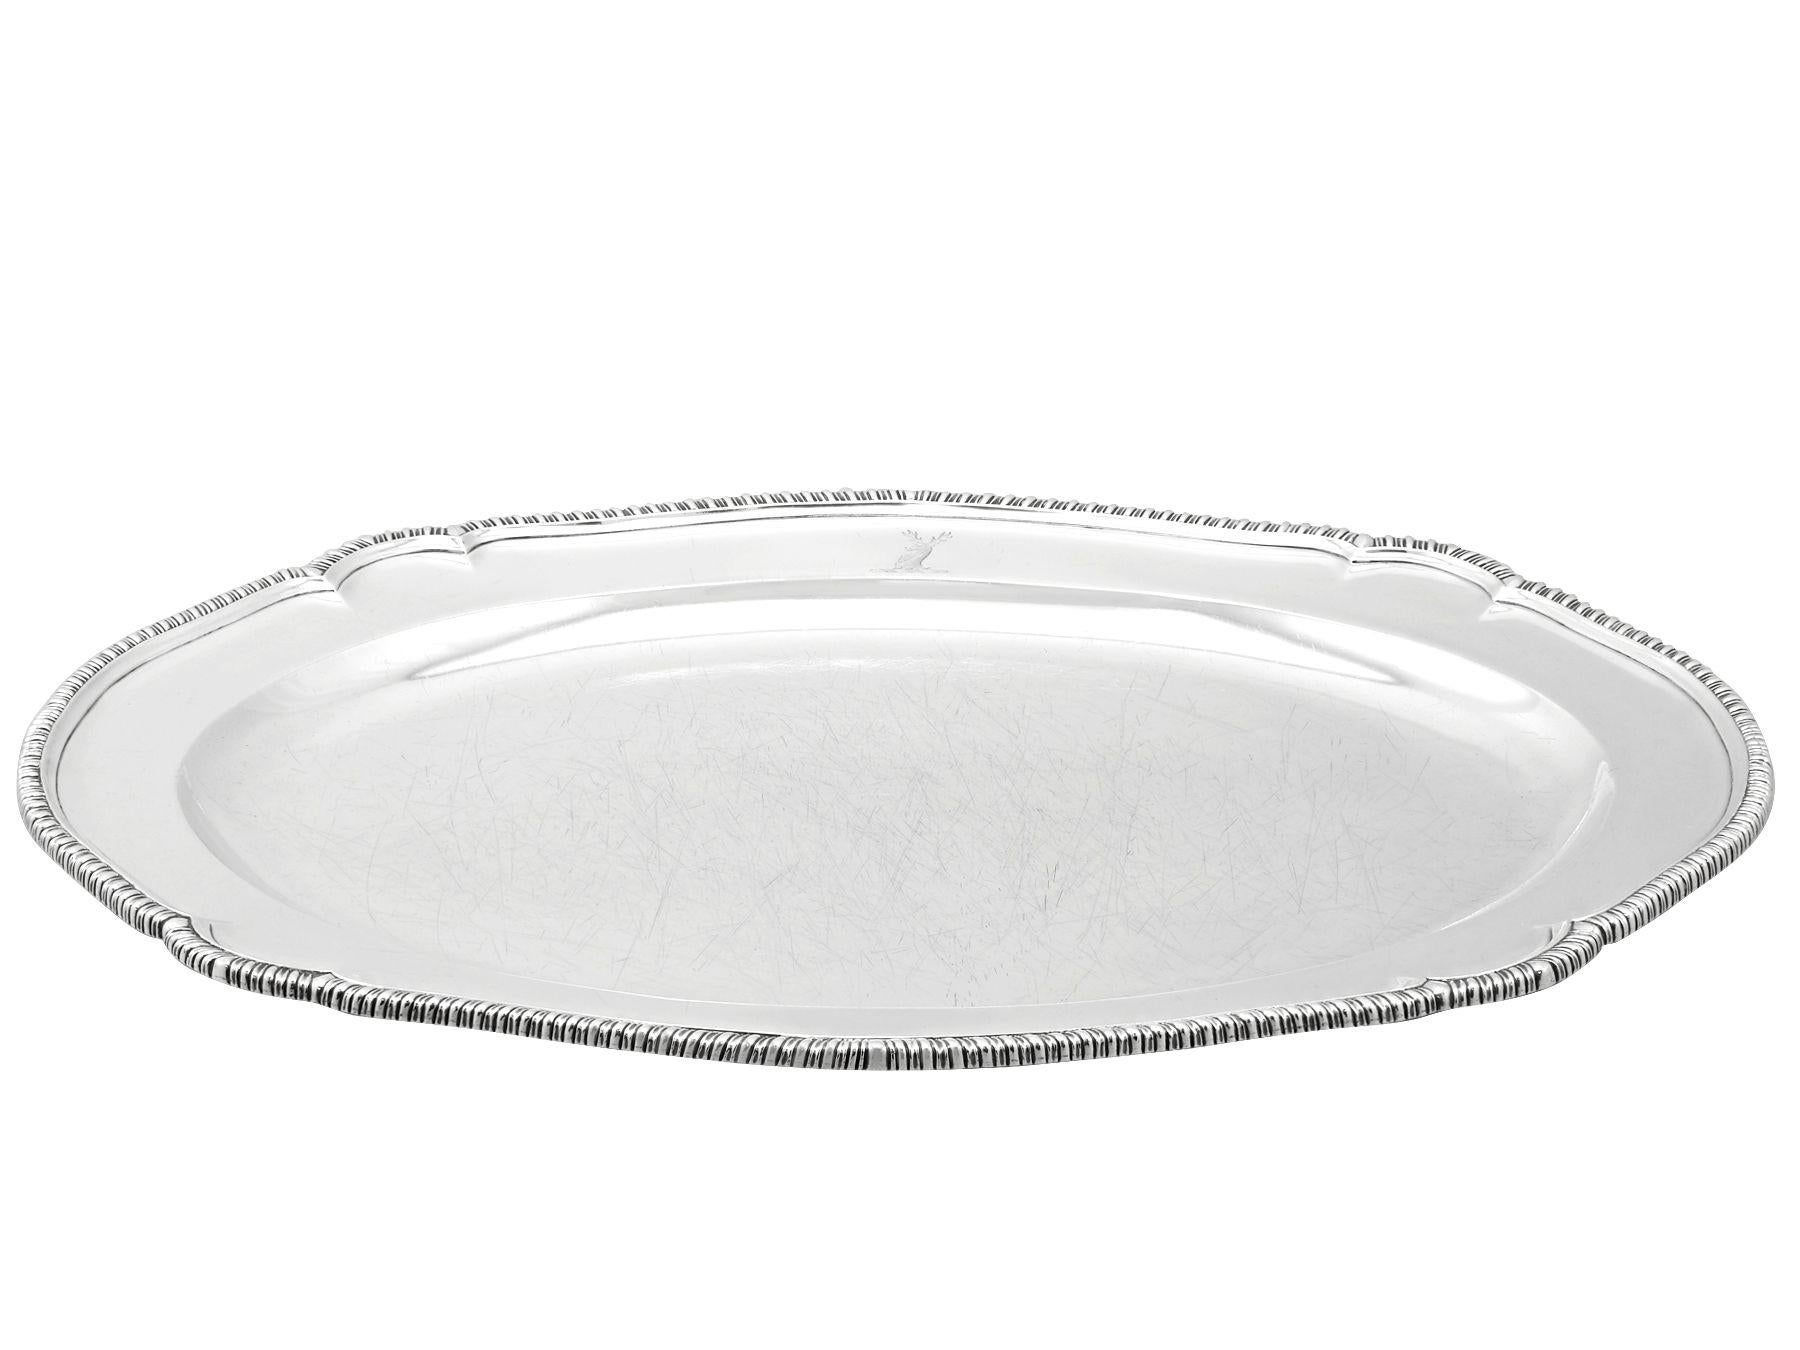 An exceptional, fine and impressive antique Georgian York sterling silver meat platter made by Robert Cattle & James Barber; an addition to our dining silverware collection.

This magnificent antique George III sterling silver platter has an oval